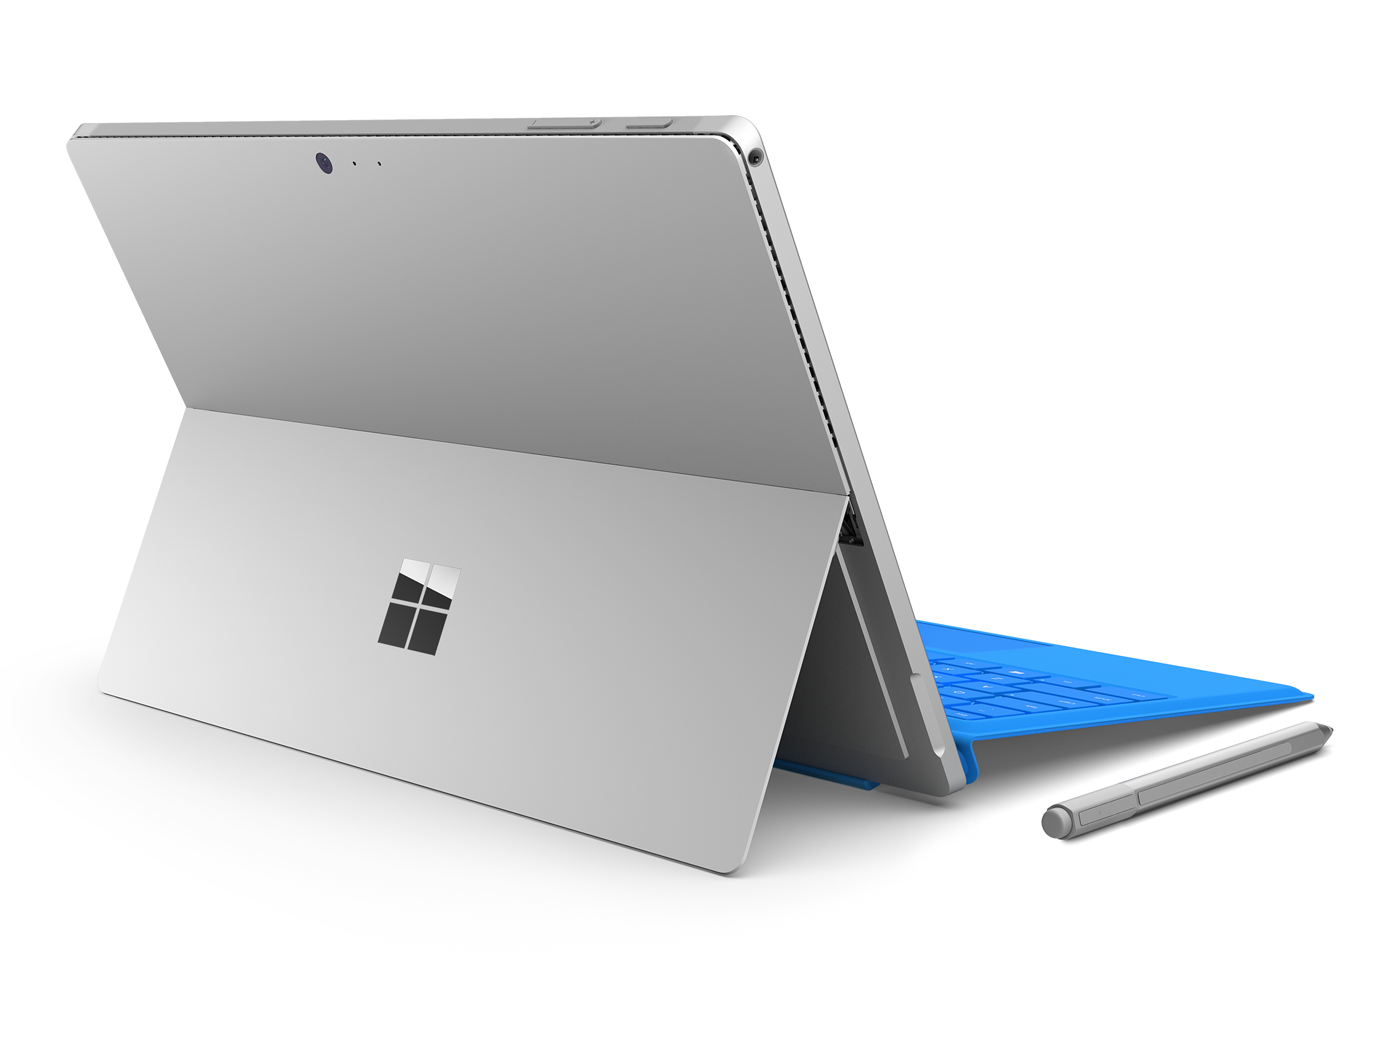 Microsoft Surface Pro 4 (Core i5, 128 GB) Tablet Review - NotebookCheck.net  Reviews